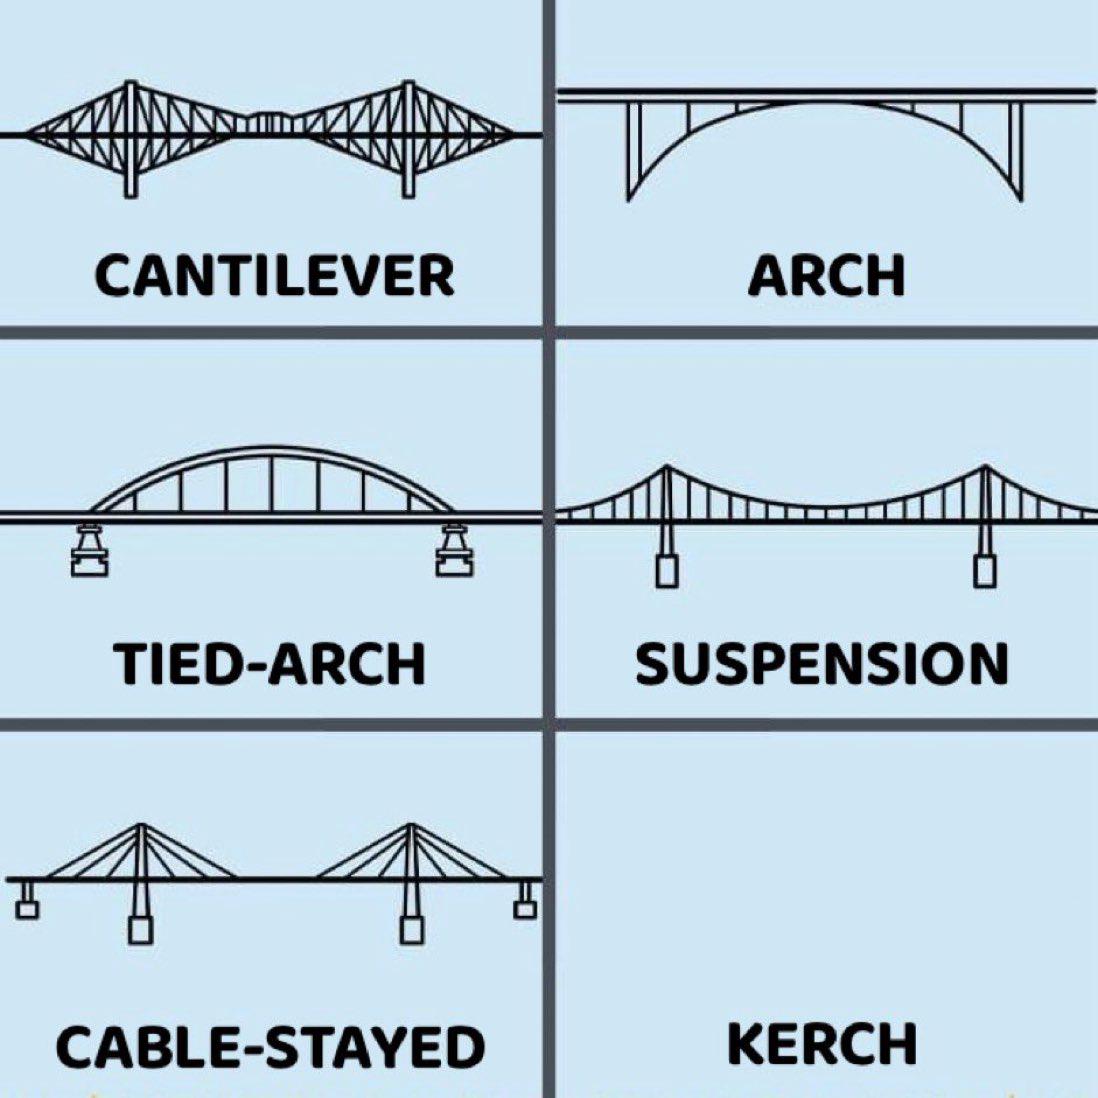 what's your favourite type of bridge?